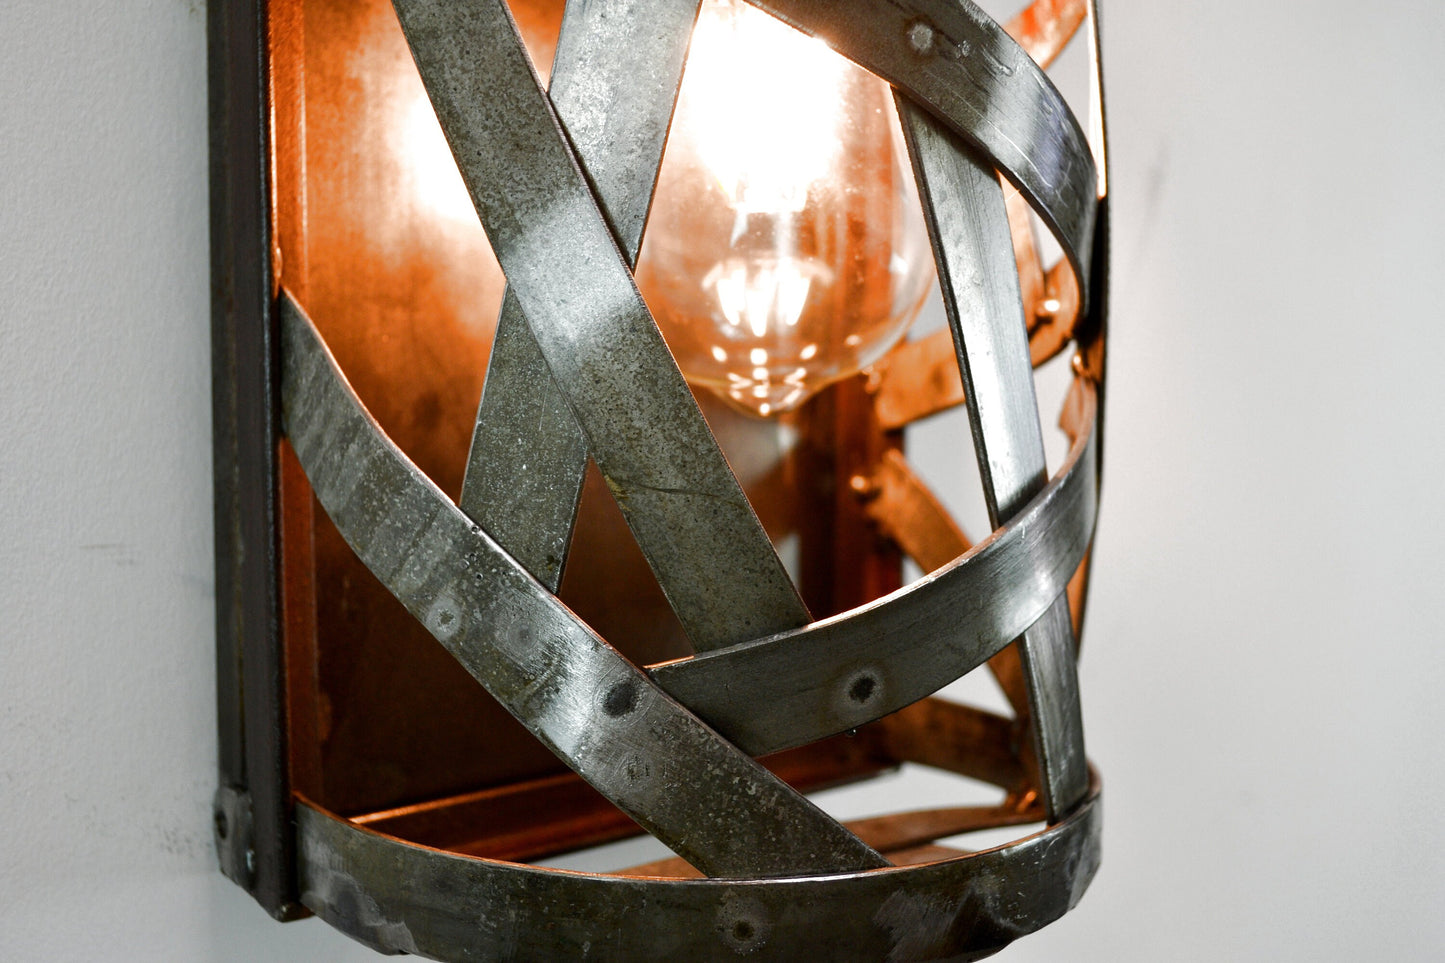 Wine Barrel Ring Wall Sconce or Vanity Light - Dobar - Made from retired CA wine barrel rings 100% Recycled!